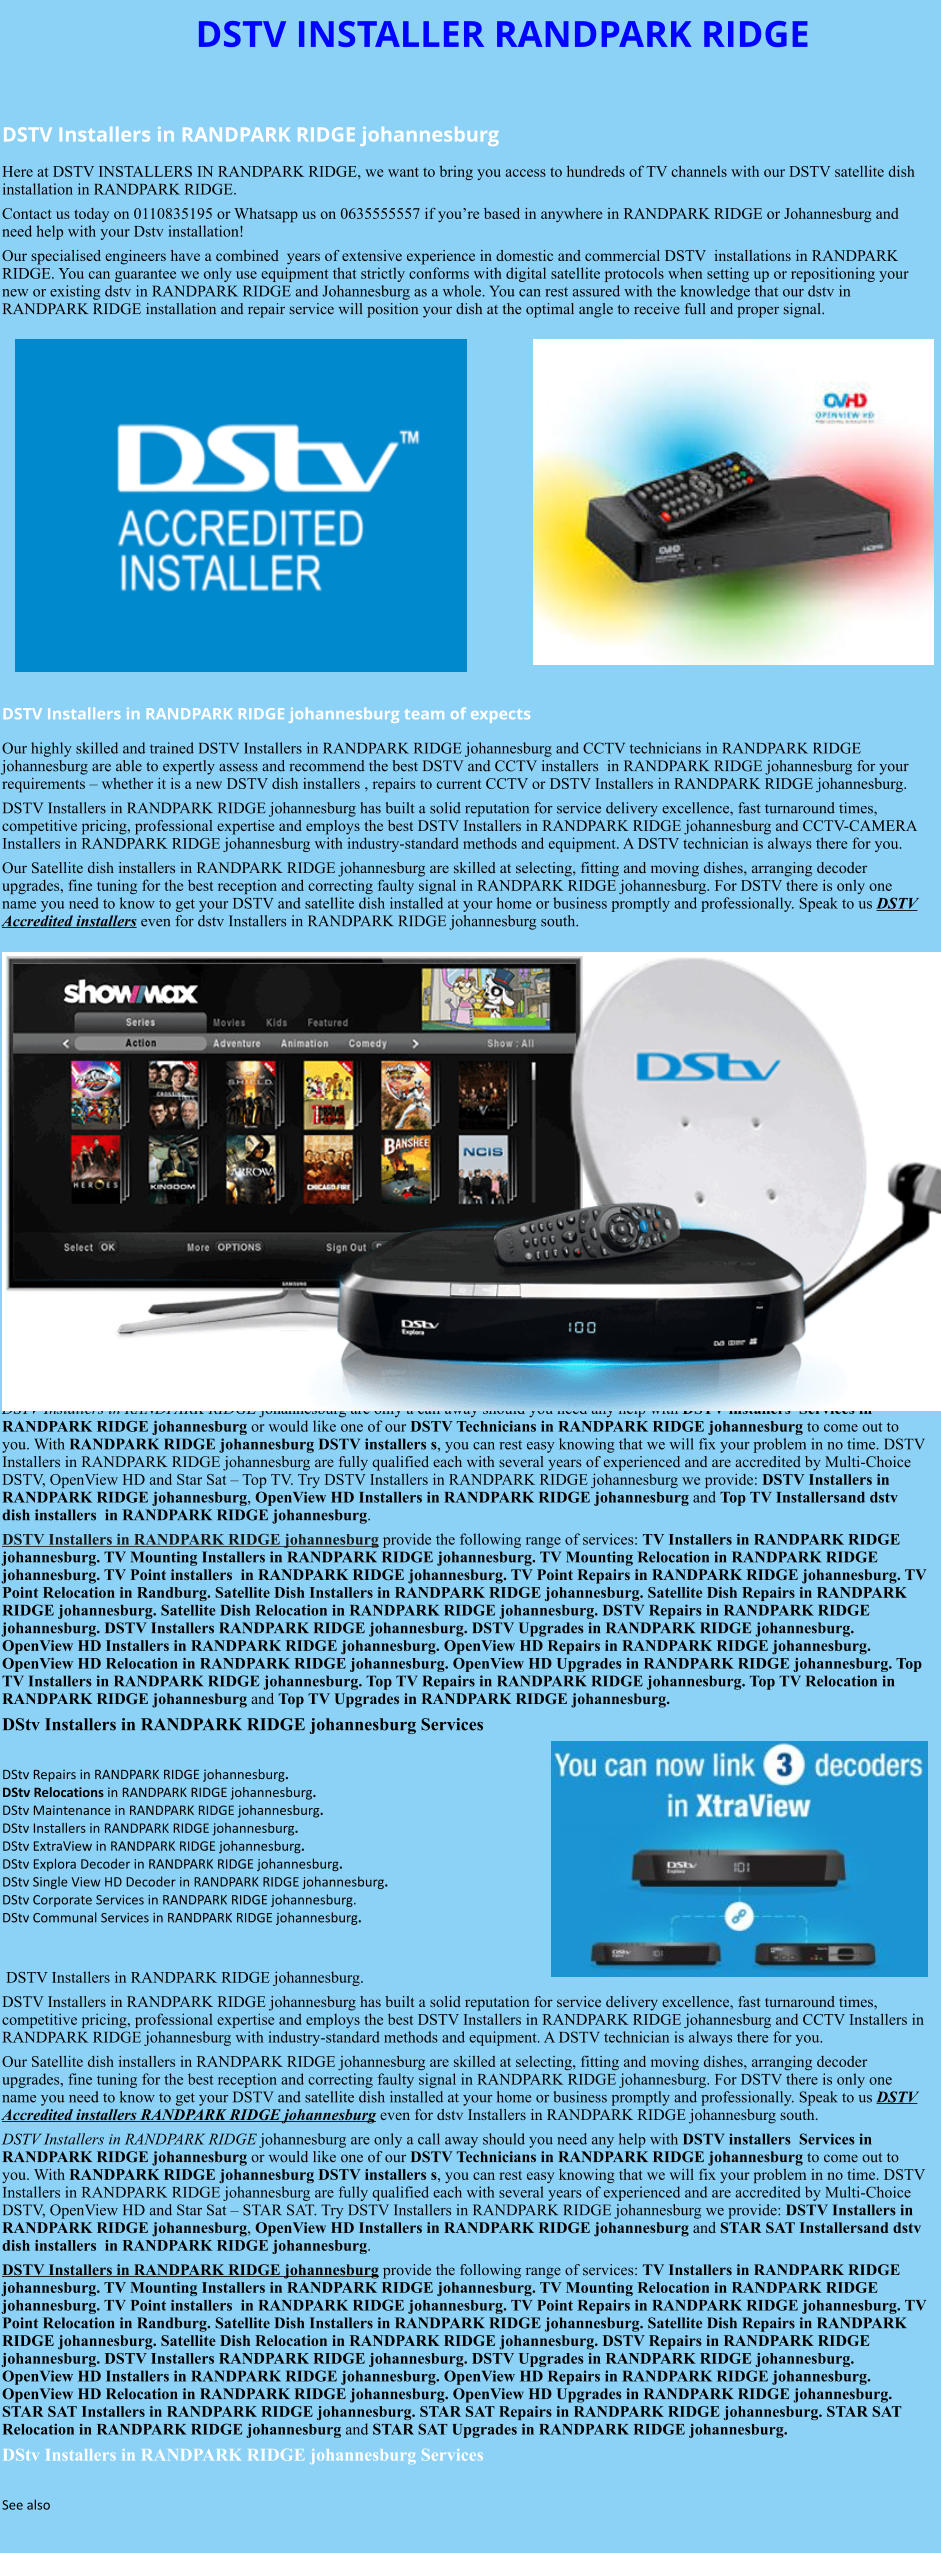 DSTV INSTALLER RANDPARK RIDGE  DSTV Installers in RANDPARK RIDGE johannesburg  Here at DSTV INSTALLERS IN RANDPARK RIDGE, we want to bring you access to hundreds of TV channels with our DSTV satellite dish installation in RANDPARK RIDGE. Contact us today on 0110835195 or Whatsapp us on 0635555557 if you’re based in anywhere in RANDPARK RIDGE or Johannesburg and need help with your Dstv installation! Our specialised engineers have a combined  years of extensive experience in domestic and commercial DSTV  installations in RANDPARK RIDGE. You can guarantee we only use equipment that strictly conforms with digital satellite protocols when setting up or repositioning your new or existing dstv in RANDPARK RIDGE and Johannesburg as a whole. You can rest assured with the knowledge that our dstv in RANDPARK RIDGE installation and repair service will position your dish at the optimal angle to receive full and proper signal.                DSTV Installers in RANDPARK RIDGE johannesburg team of expects Our highly skilled and trained DSTV Installers in RANDPARK RIDGE johannesburg and CCTV technicians in RANDPARK RIDGE johannesburg are able to expertly assess and recommend the best DSTV and CCTV installers  in RANDPARK RIDGE johannesburg for your requirements – whether it is a new DSTV dish installers , repairs to current CCTV or DSTV Installers in RANDPARK RIDGE johannesburg. DSTV Installers in RANDPARK RIDGE johannesburg has built a solid reputation for service delivery excellence, fast turnaround times, competitive pricing, professional expertise and employs the best DSTV Installers in RANDPARK RIDGE johannesburg and CCTV-CAMERA Installers in RANDPARK RIDGE johannesburg with industry-standard methods and equipment. A DSTV technician is always there for you. Our Satellite dish installers in RANDPARK RIDGE johannesburg are skilled at selecting, fitting and moving dishes, arranging decoder upgrades, fine tuning for the best reception and correcting faulty signal in RANDPARK RIDGE johannesburg. For DSTV there is only one name you need to know to get your DSTV and satellite dish installed at your home or business promptly and professionally. Speak to us DSTV Accredited installers even for dstv Installers in RANDPARK RIDGE johannesburg south.                    DSTV Installers in RANDPARK RIDGE johannesburg are only a call away should you need any help with DSTV installers  Services in RANDPARK RIDGE johannesburg or would like one of our DSTV Technicians in RANDPARK RIDGE johannesburg to come out to you. With RANDPARK RIDGE johannesburg DSTV installers s, you can rest easy knowing that we will fix your problem in no time. DSTV Installers in RANDPARK RIDGE johannesburg are fully qualified each with several years of experienced and are accredited by Multi-Choice DSTV, OpenView HD and Star Sat – Top TV. Try DSTV Installers in RANDPARK RIDGE johannesburg we provide: DSTV Installers in RANDPARK RIDGE johannesburg, OpenView HD Installers in RANDPARK RIDGE johannesburg and Top TV Installersand dstv dish installers  in RANDPARK RIDGE johannesburg. DSTV Installers in RANDPARK RIDGE johannesburg provide the following range of services: TV Installers in RANDPARK RIDGE johannesburg. TV Mounting Installers in RANDPARK RIDGE johannesburg. TV Mounting Relocation in RANDPARK RIDGE johannesburg. TV Point installers  in RANDPARK RIDGE johannesburg. TV Point Repairs in RANDPARK RIDGE johannesburg. TV Point Relocation in Randburg. Satellite Dish Installers in RANDPARK RIDGE johannesburg. Satellite Dish Repairs in RANDPARK RIDGE johannesburg. Satellite Dish Relocation in RANDPARK RIDGE johannesburg. DSTV Repairs in RANDPARK RIDGE johannesburg. DSTV Installers RANDPARK RIDGE johannesburg. DSTV Upgrades in RANDPARK RIDGE johannesburg. OpenView HD Installers in RANDPARK RIDGE johannesburg. OpenView HD Repairs in RANDPARK RIDGE johannesburg. OpenView HD Relocation in RANDPARK RIDGE johannesburg. OpenView HD Upgrades in RANDPARK RIDGE johannesburg. Top TV Installers in RANDPARK RIDGE johannesburg. Top TV Repairs in RANDPARK RIDGE johannesburg. Top TV Relocation in RANDPARK RIDGE johannesburg and Top TV Upgrades in RANDPARK RIDGE johannesburg. DStv Installers in RANDPARK RIDGE johannesburg Services  DStv Repairs in RANDPARK RIDGE johannesburg.  DStv Relocations in RANDPARK RIDGE johannesburg.  DStv Maintenance in RANDPARK RIDGE johannesburg. DStv Installers in RANDPARK RIDGE johannesburg. DStv ExtraView in RANDPARK RIDGE johannesburg. DStv Explora Decoder in RANDPARK RIDGE johannesburg. DStv Single View HD Decoder in RANDPARK RIDGE johannesburg. DStv Corporate Services in RANDPARK RIDGE johannesburg. DStv Communal Services in RANDPARK RIDGE johannesburg.    DSTV Installers in RANDPARK RIDGE johannesburg. DSTV Installers in RANDPARK RIDGE johannesburg has built a solid reputation for service delivery excellence, fast turnaround times, competitive pricing, professional expertise and employs the best DSTV Installers in RANDPARK RIDGE johannesburg and CCTV Installers in RANDPARK RIDGE johannesburg with industry-standard methods and equipment. A DSTV technician is always there for you. Our Satellite dish installers in RANDPARK RIDGE johannesburg are skilled at selecting, fitting and moving dishes, arranging decoder upgrades, fine tuning for the best reception and correcting faulty signal in RANDPARK RIDGE johannesburg. For DSTV there is only one name you need to know to get your DSTV and satellite dish installed at your home or business promptly and professionally. Speak to us DSTV Accredited installers RANDPARK RIDGE johannesburg even for dstv Installers in RANDPARK RIDGE johannesburg south. DSTV Installers in RANDPARK RIDGE johannesburg are only a call away should you need any help with DSTV installers  Services in RANDPARK RIDGE johannesburg or would like one of our DSTV Technicians in RANDPARK RIDGE johannesburg to come out to you. With RANDPARK RIDGE johannesburg DSTV installers s, you can rest easy knowing that we will fix your problem in no time. DSTV Installers in RANDPARK RIDGE johannesburg are fully qualified each with several years of experienced and are accredited by Multi-Choice DSTV, OpenView HD and Star Sat – STAR SAT. Try DSTV Installers in RANDPARK RIDGE johannesburg we provide: DSTV Installers in RANDPARK RIDGE johannesburg, OpenView HD Installers in RANDPARK RIDGE johannesburg and STAR SAT Installersand dstv dish installers  in RANDPARK RIDGE johannesburg. DSTV Installers in RANDPARK RIDGE johannesburg provide the following range of services: TV Installers in RANDPARK RIDGE johannesburg. TV Mounting Installers in RANDPARK RIDGE johannesburg. TV Mounting Relocation in RANDPARK RIDGE johannesburg. TV Point installers  in RANDPARK RIDGE johannesburg. TV Point Repairs in RANDPARK RIDGE johannesburg. TV Point Relocation in Randburg. Satellite Dish Installers in RANDPARK RIDGE johannesburg. Satellite Dish Repairs in RANDPARK RIDGE johannesburg. Satellite Dish Relocation in RANDPARK RIDGE johannesburg. DSTV Repairs in RANDPARK RIDGE johannesburg. DSTV Installers RANDPARK RIDGE johannesburg. DSTV Upgrades in RANDPARK RIDGE johannesburg. OpenView HD Installers in RANDPARK RIDGE johannesburg. OpenView HD Repairs in RANDPARK RIDGE johannesburg. OpenView HD Relocation in RANDPARK RIDGE johannesburg. OpenView HD Upgrades in RANDPARK RIDGE johannesburg. STAR SAT Installers in RANDPARK RIDGE johannesburg. STAR SAT Repairs in RANDPARK RIDGE johannesburg. STAR SAT Relocation in RANDPARK RIDGE johannesburg and STAR SAT Upgrades in RANDPARK RIDGE johannesburg. DStv Installers in RANDPARK RIDGE johannesburg Services  See also